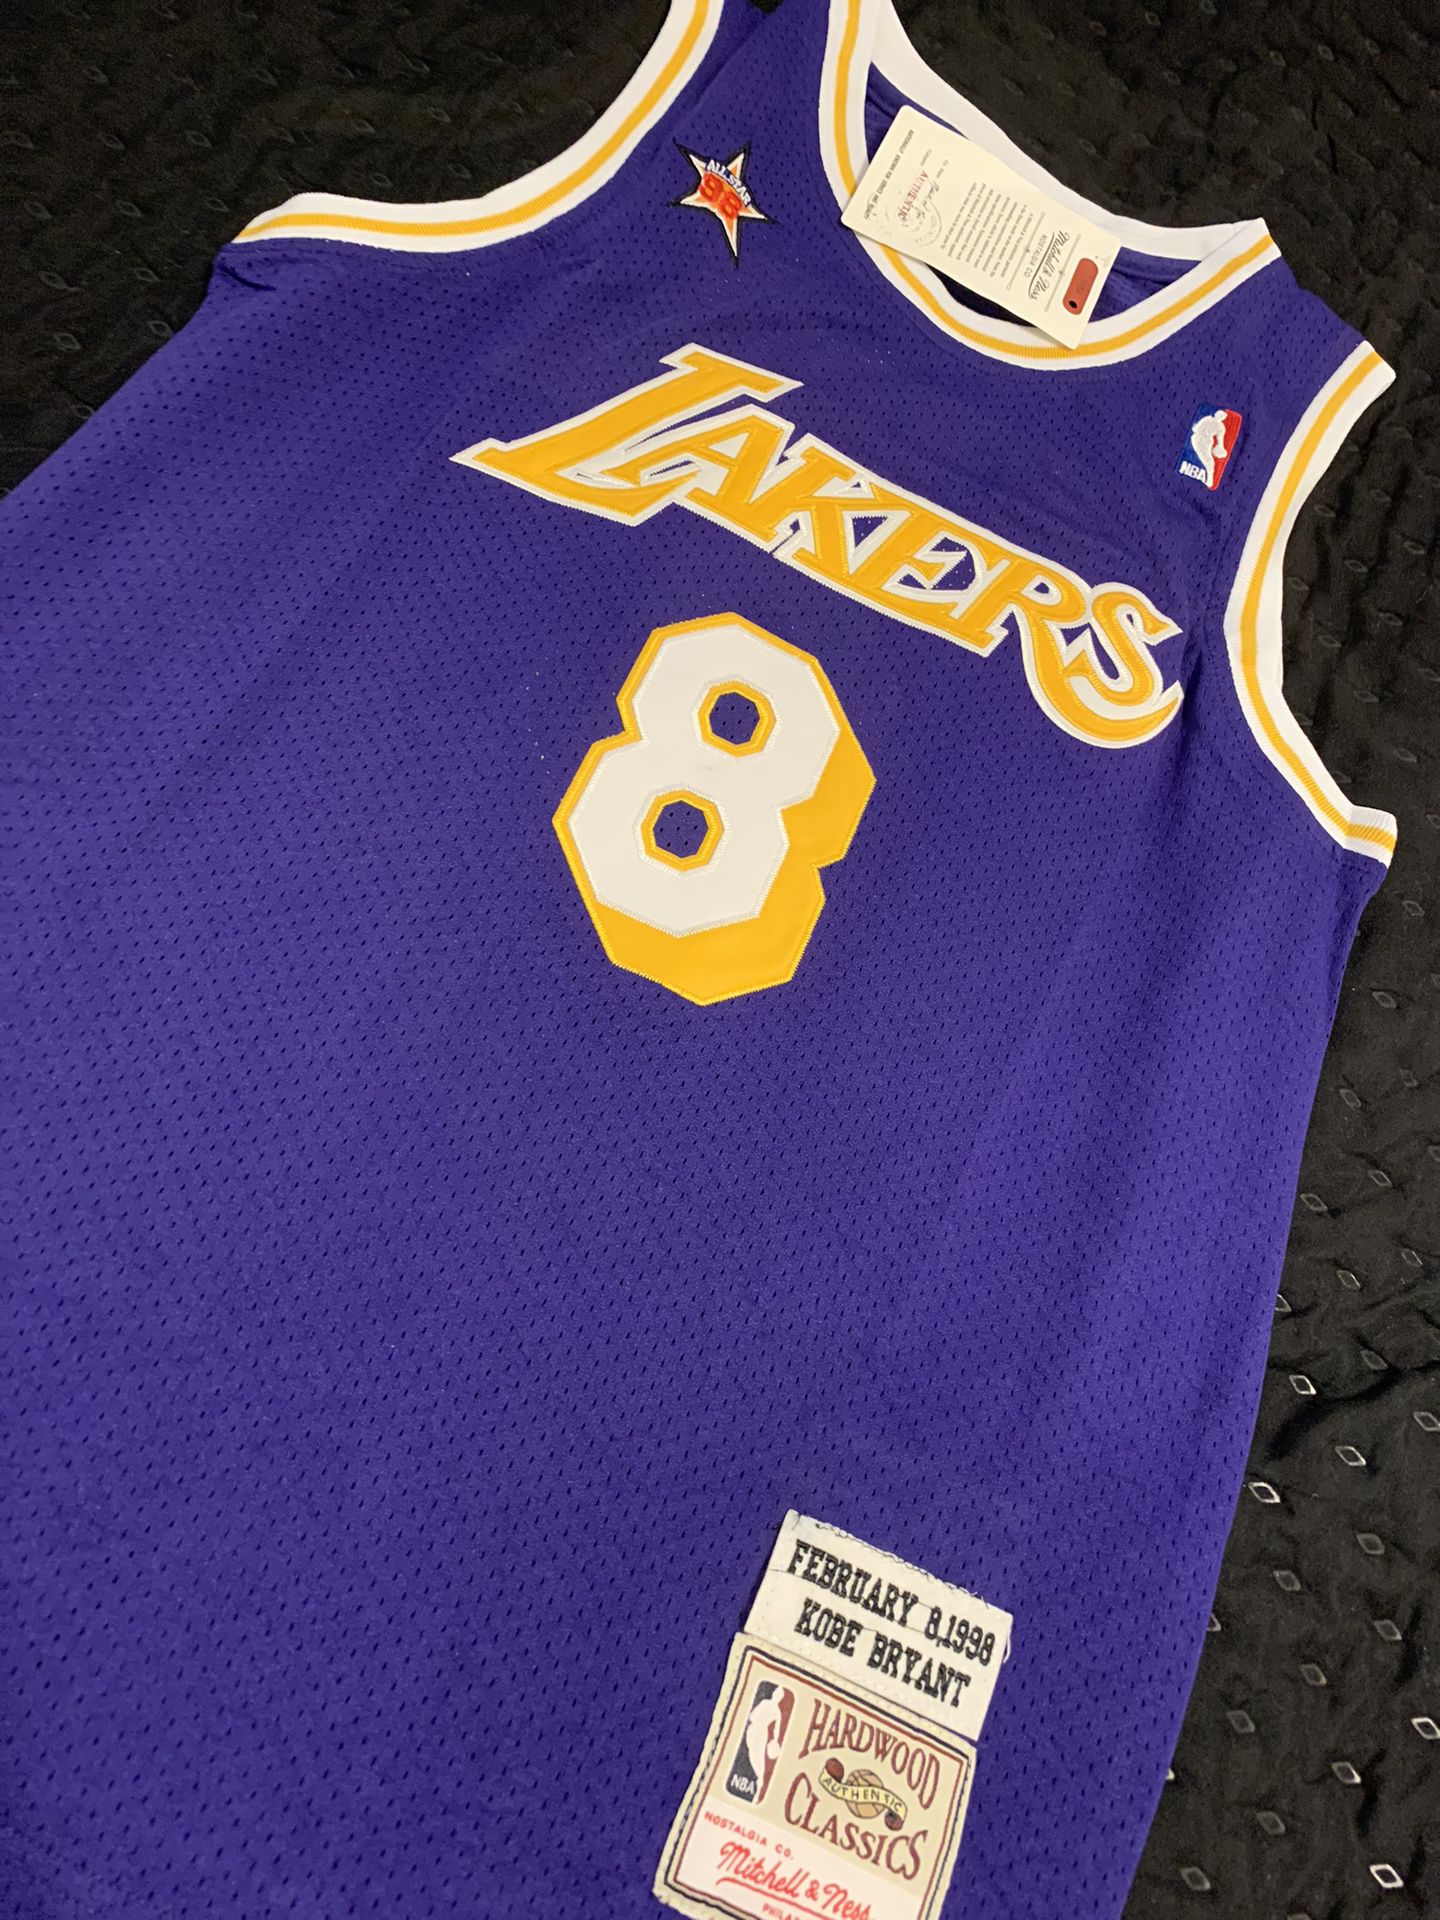 Kobe Bryant - 2003 All Star Jersey - Size M for Sale in Los Angeles, CA -  OfferUp